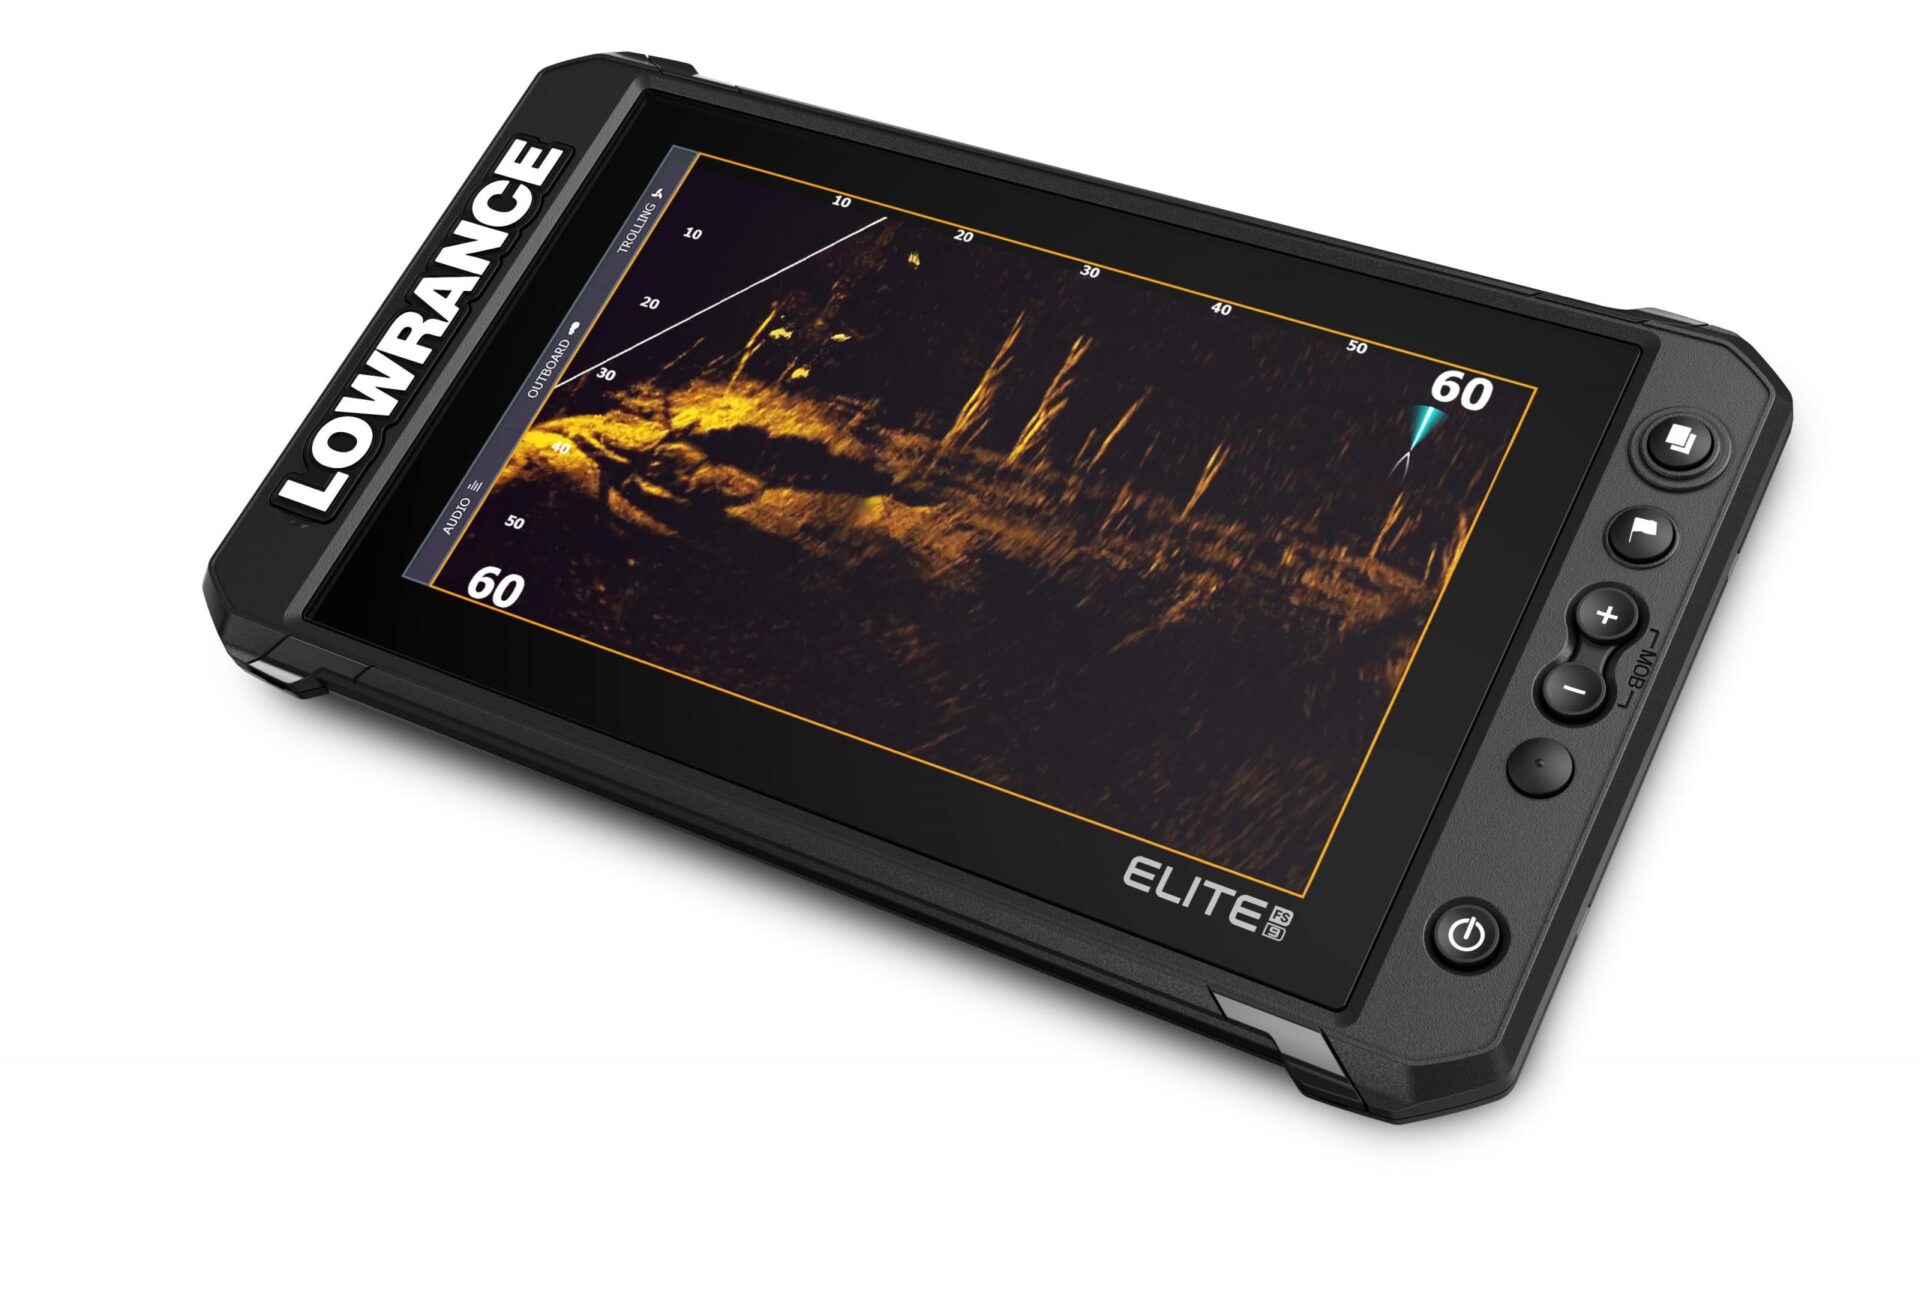 Lowrance Announces New ActiveTarget Live Sonar System - Wired2Fish